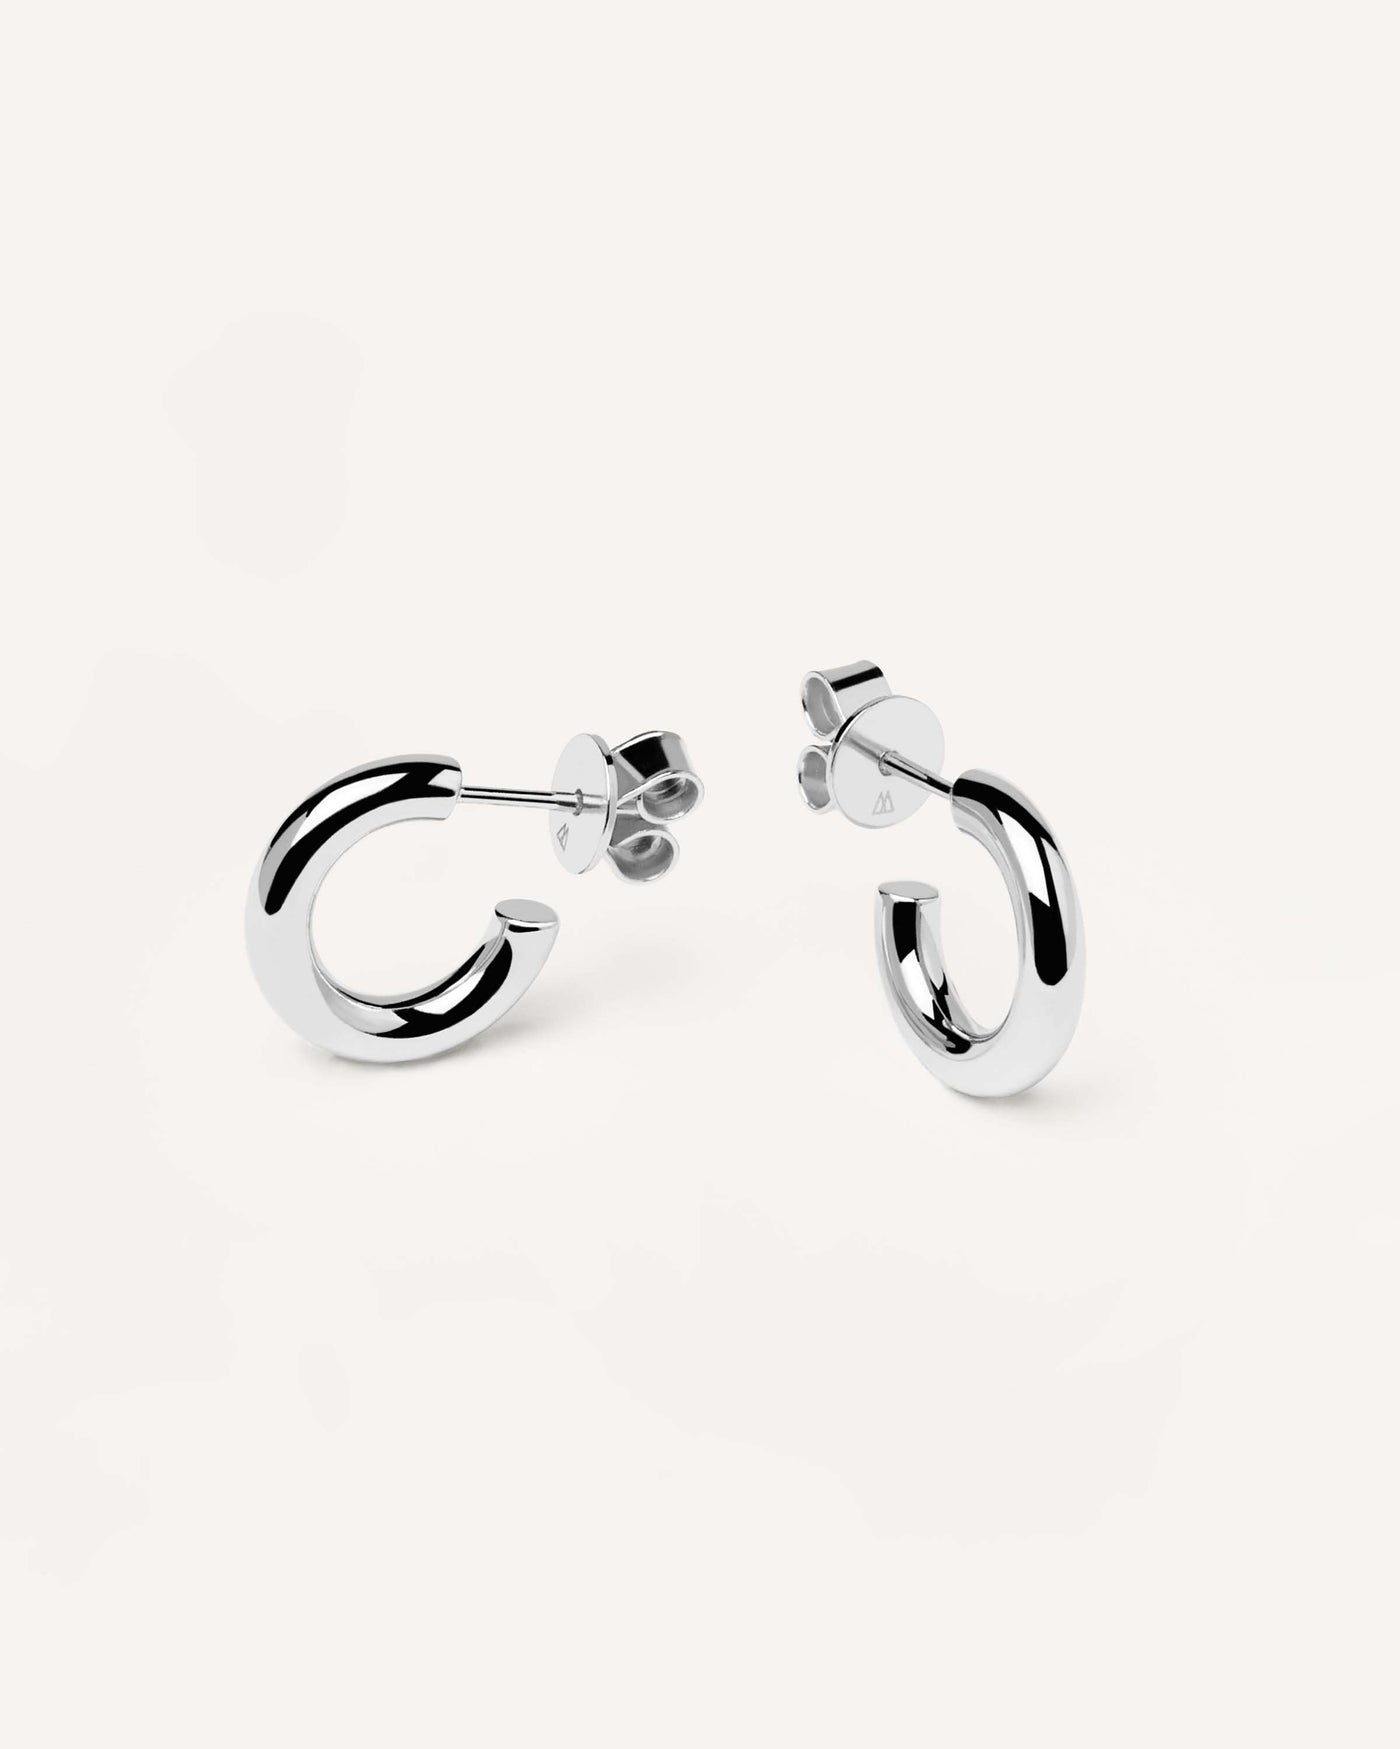 2023 Selection | Mini Cloud Silver Earrings. Huggie c-hoop earrings in 925 sterling silver  with a butterfly push-back. Get the latest arrival from PDPAOLA. Place your order safely and get this Best Seller. Free Shipping.